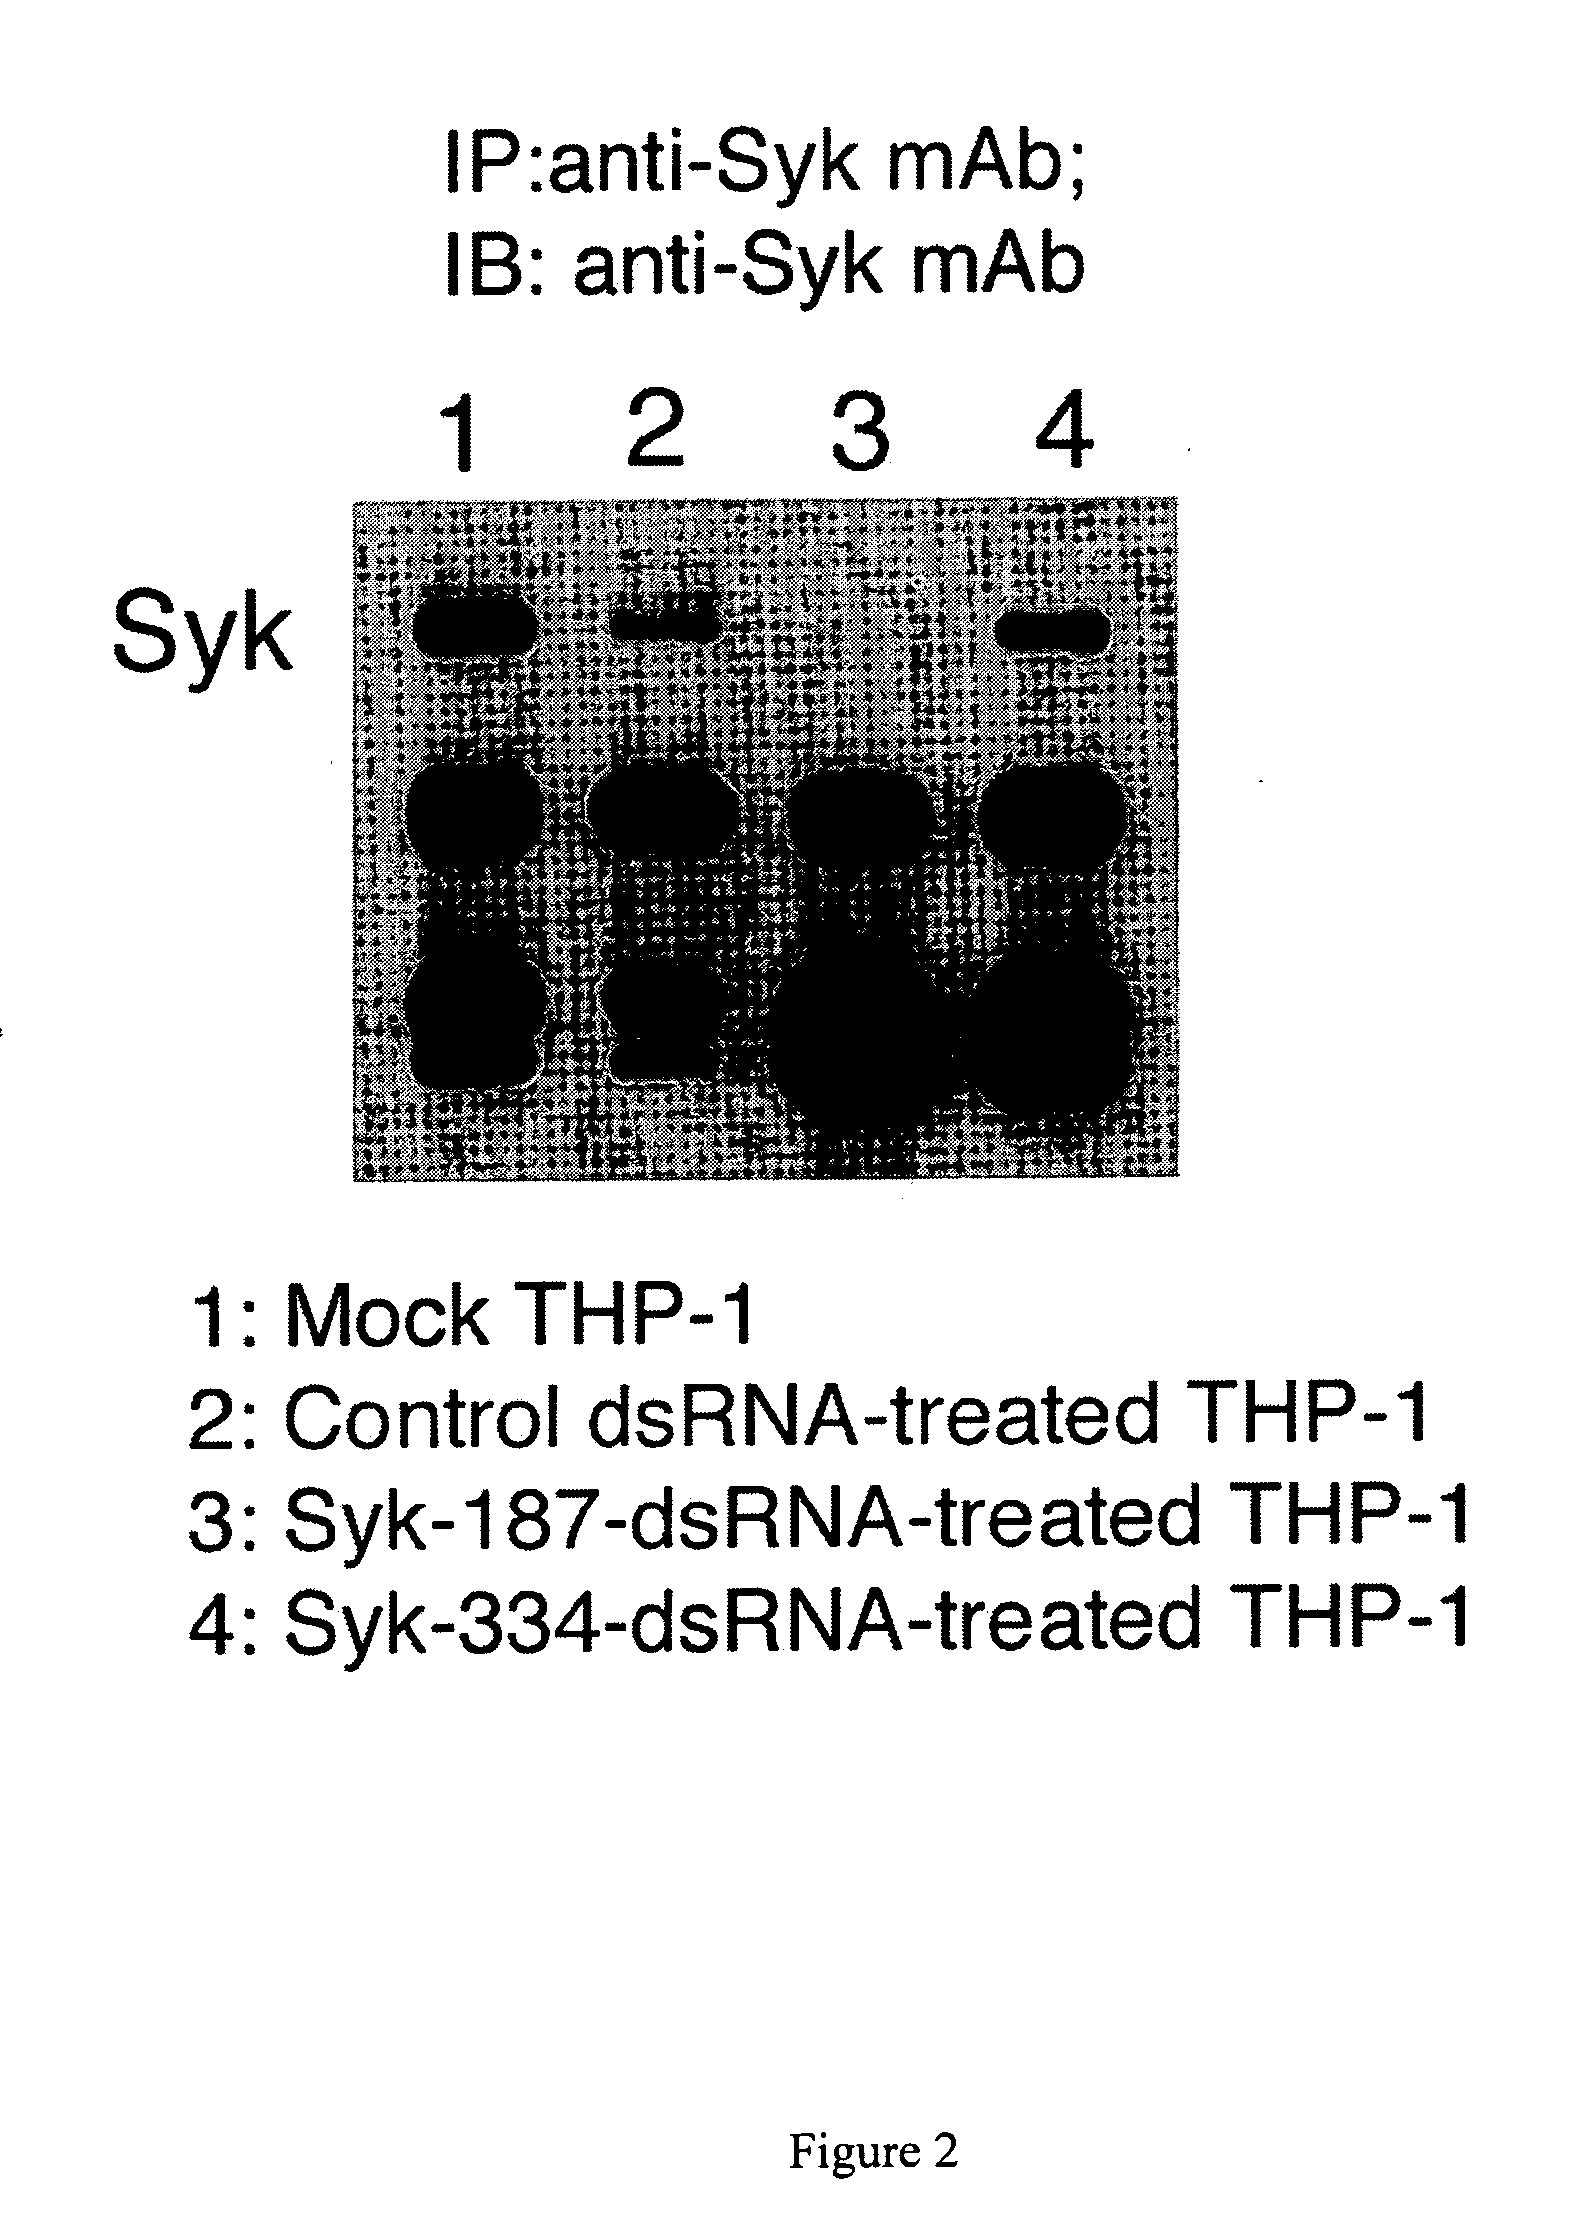 Syk-targeted nucleic acid interference